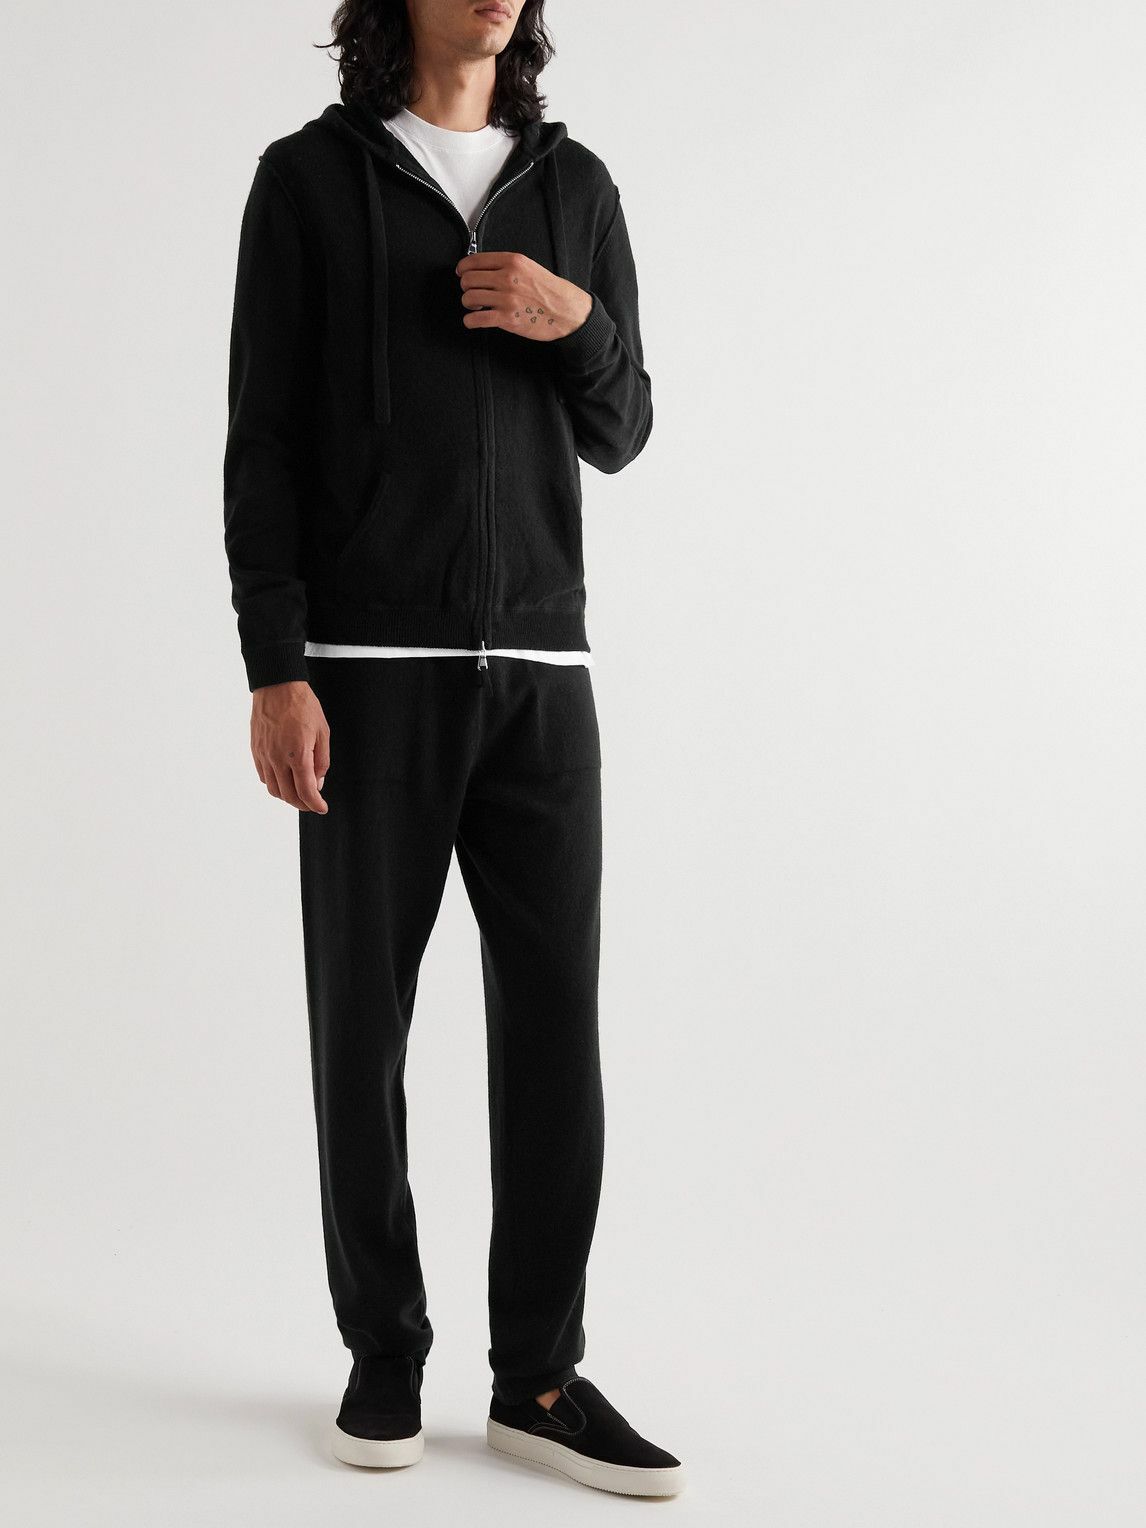 Allude - Wool and Cashmere-Blend Zip-Up Hoodie - Black